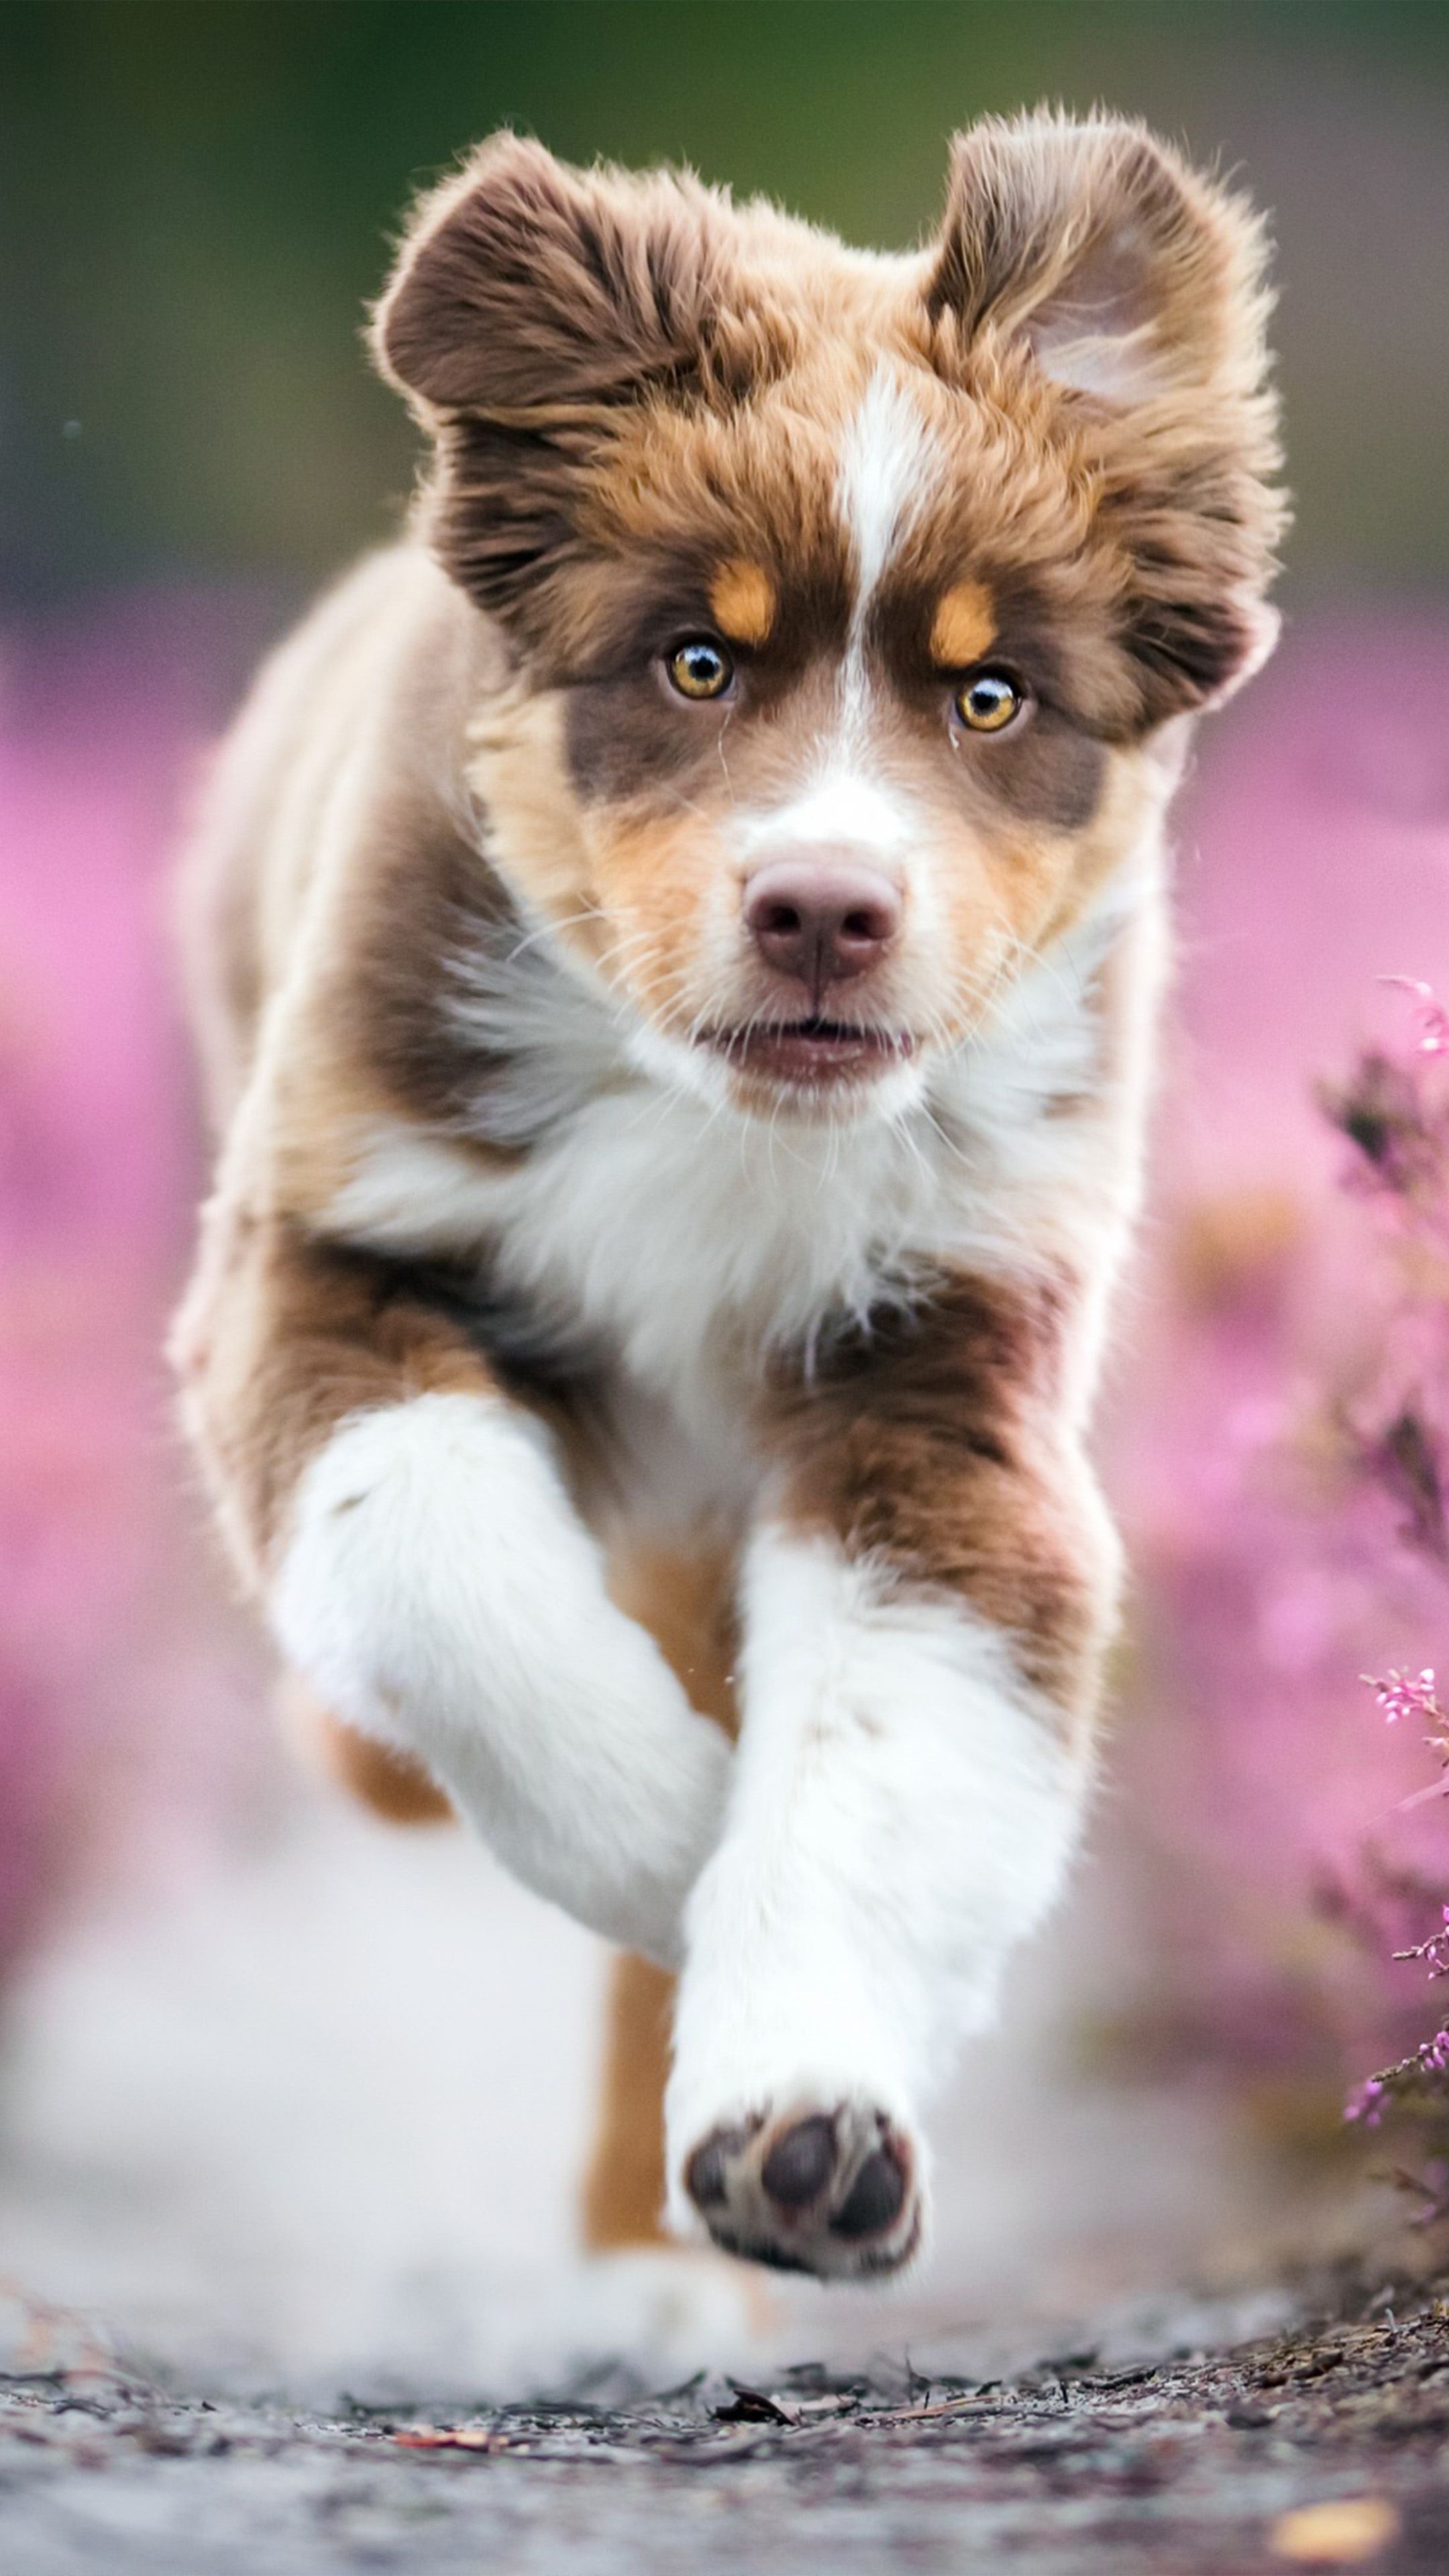 Pup ideas, Cute baby dogs, Playful companions, Heartwarming moments, 2160x3840 4K Handy